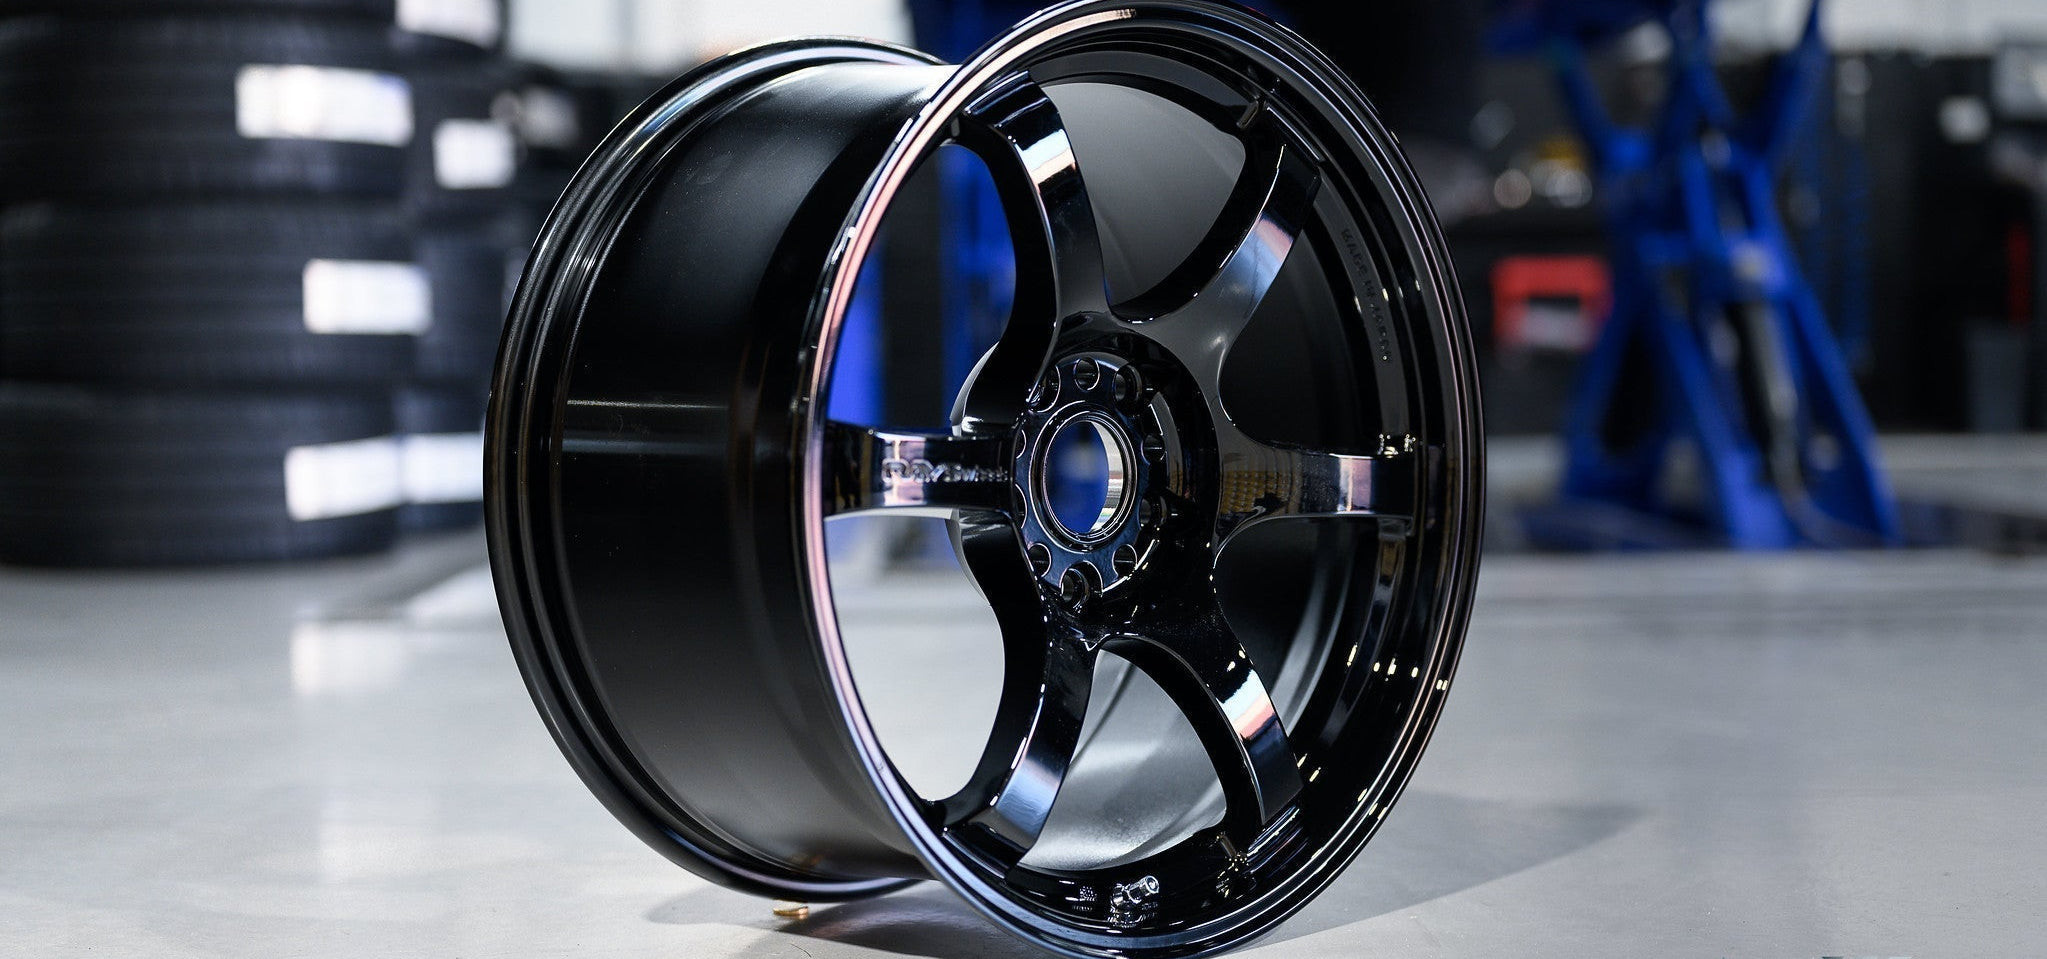 gramLIGHTS 57DR 17" - Premium Wheels from Gram Lights - From just $2000.00! Shop now at MK MOTORSPORTS